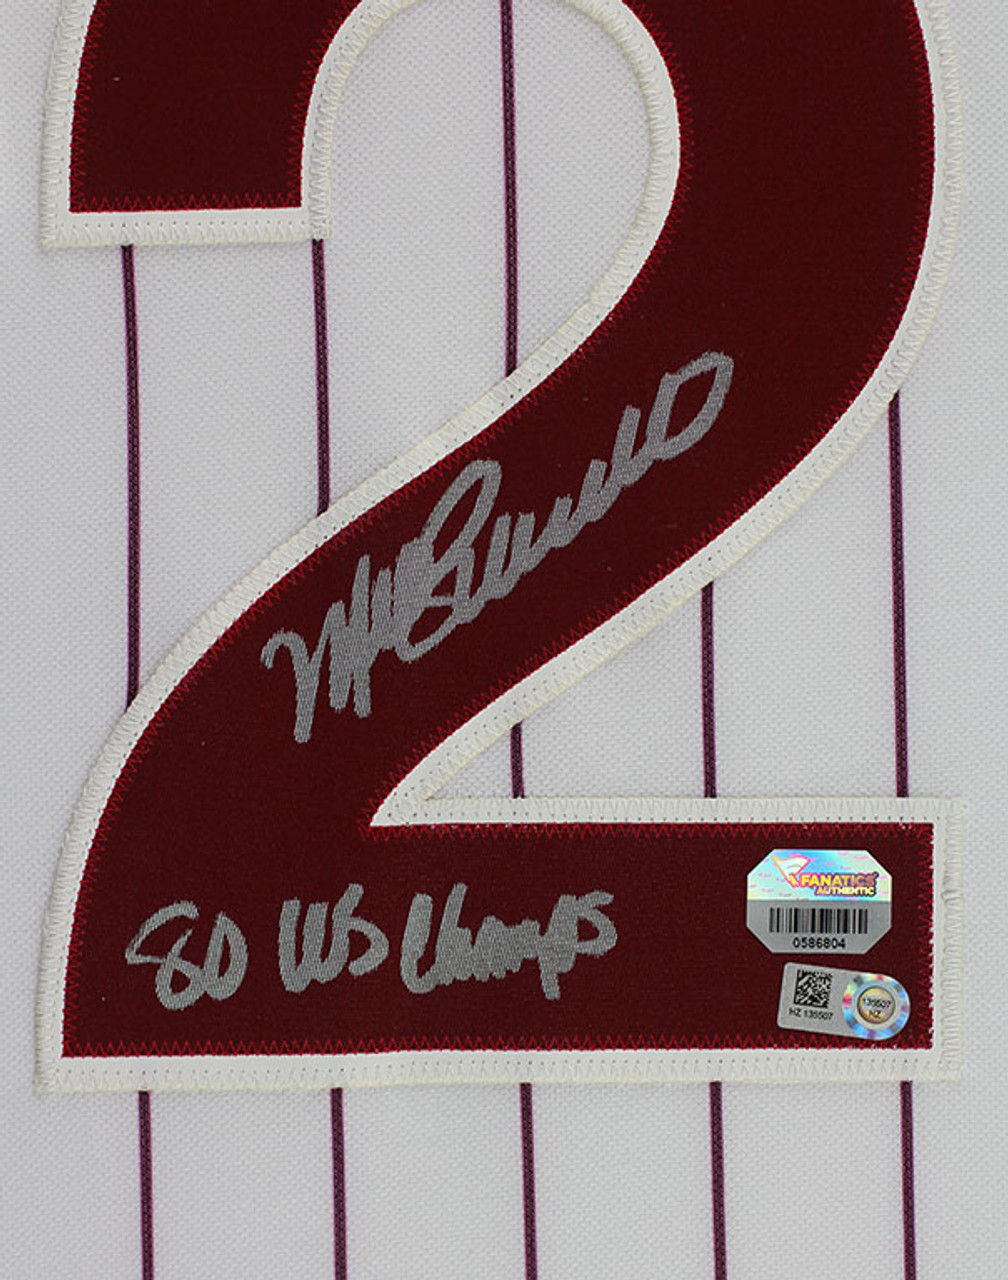 Mike Schmidt Autographed and Framed White Pinstriped Phillies Jersey